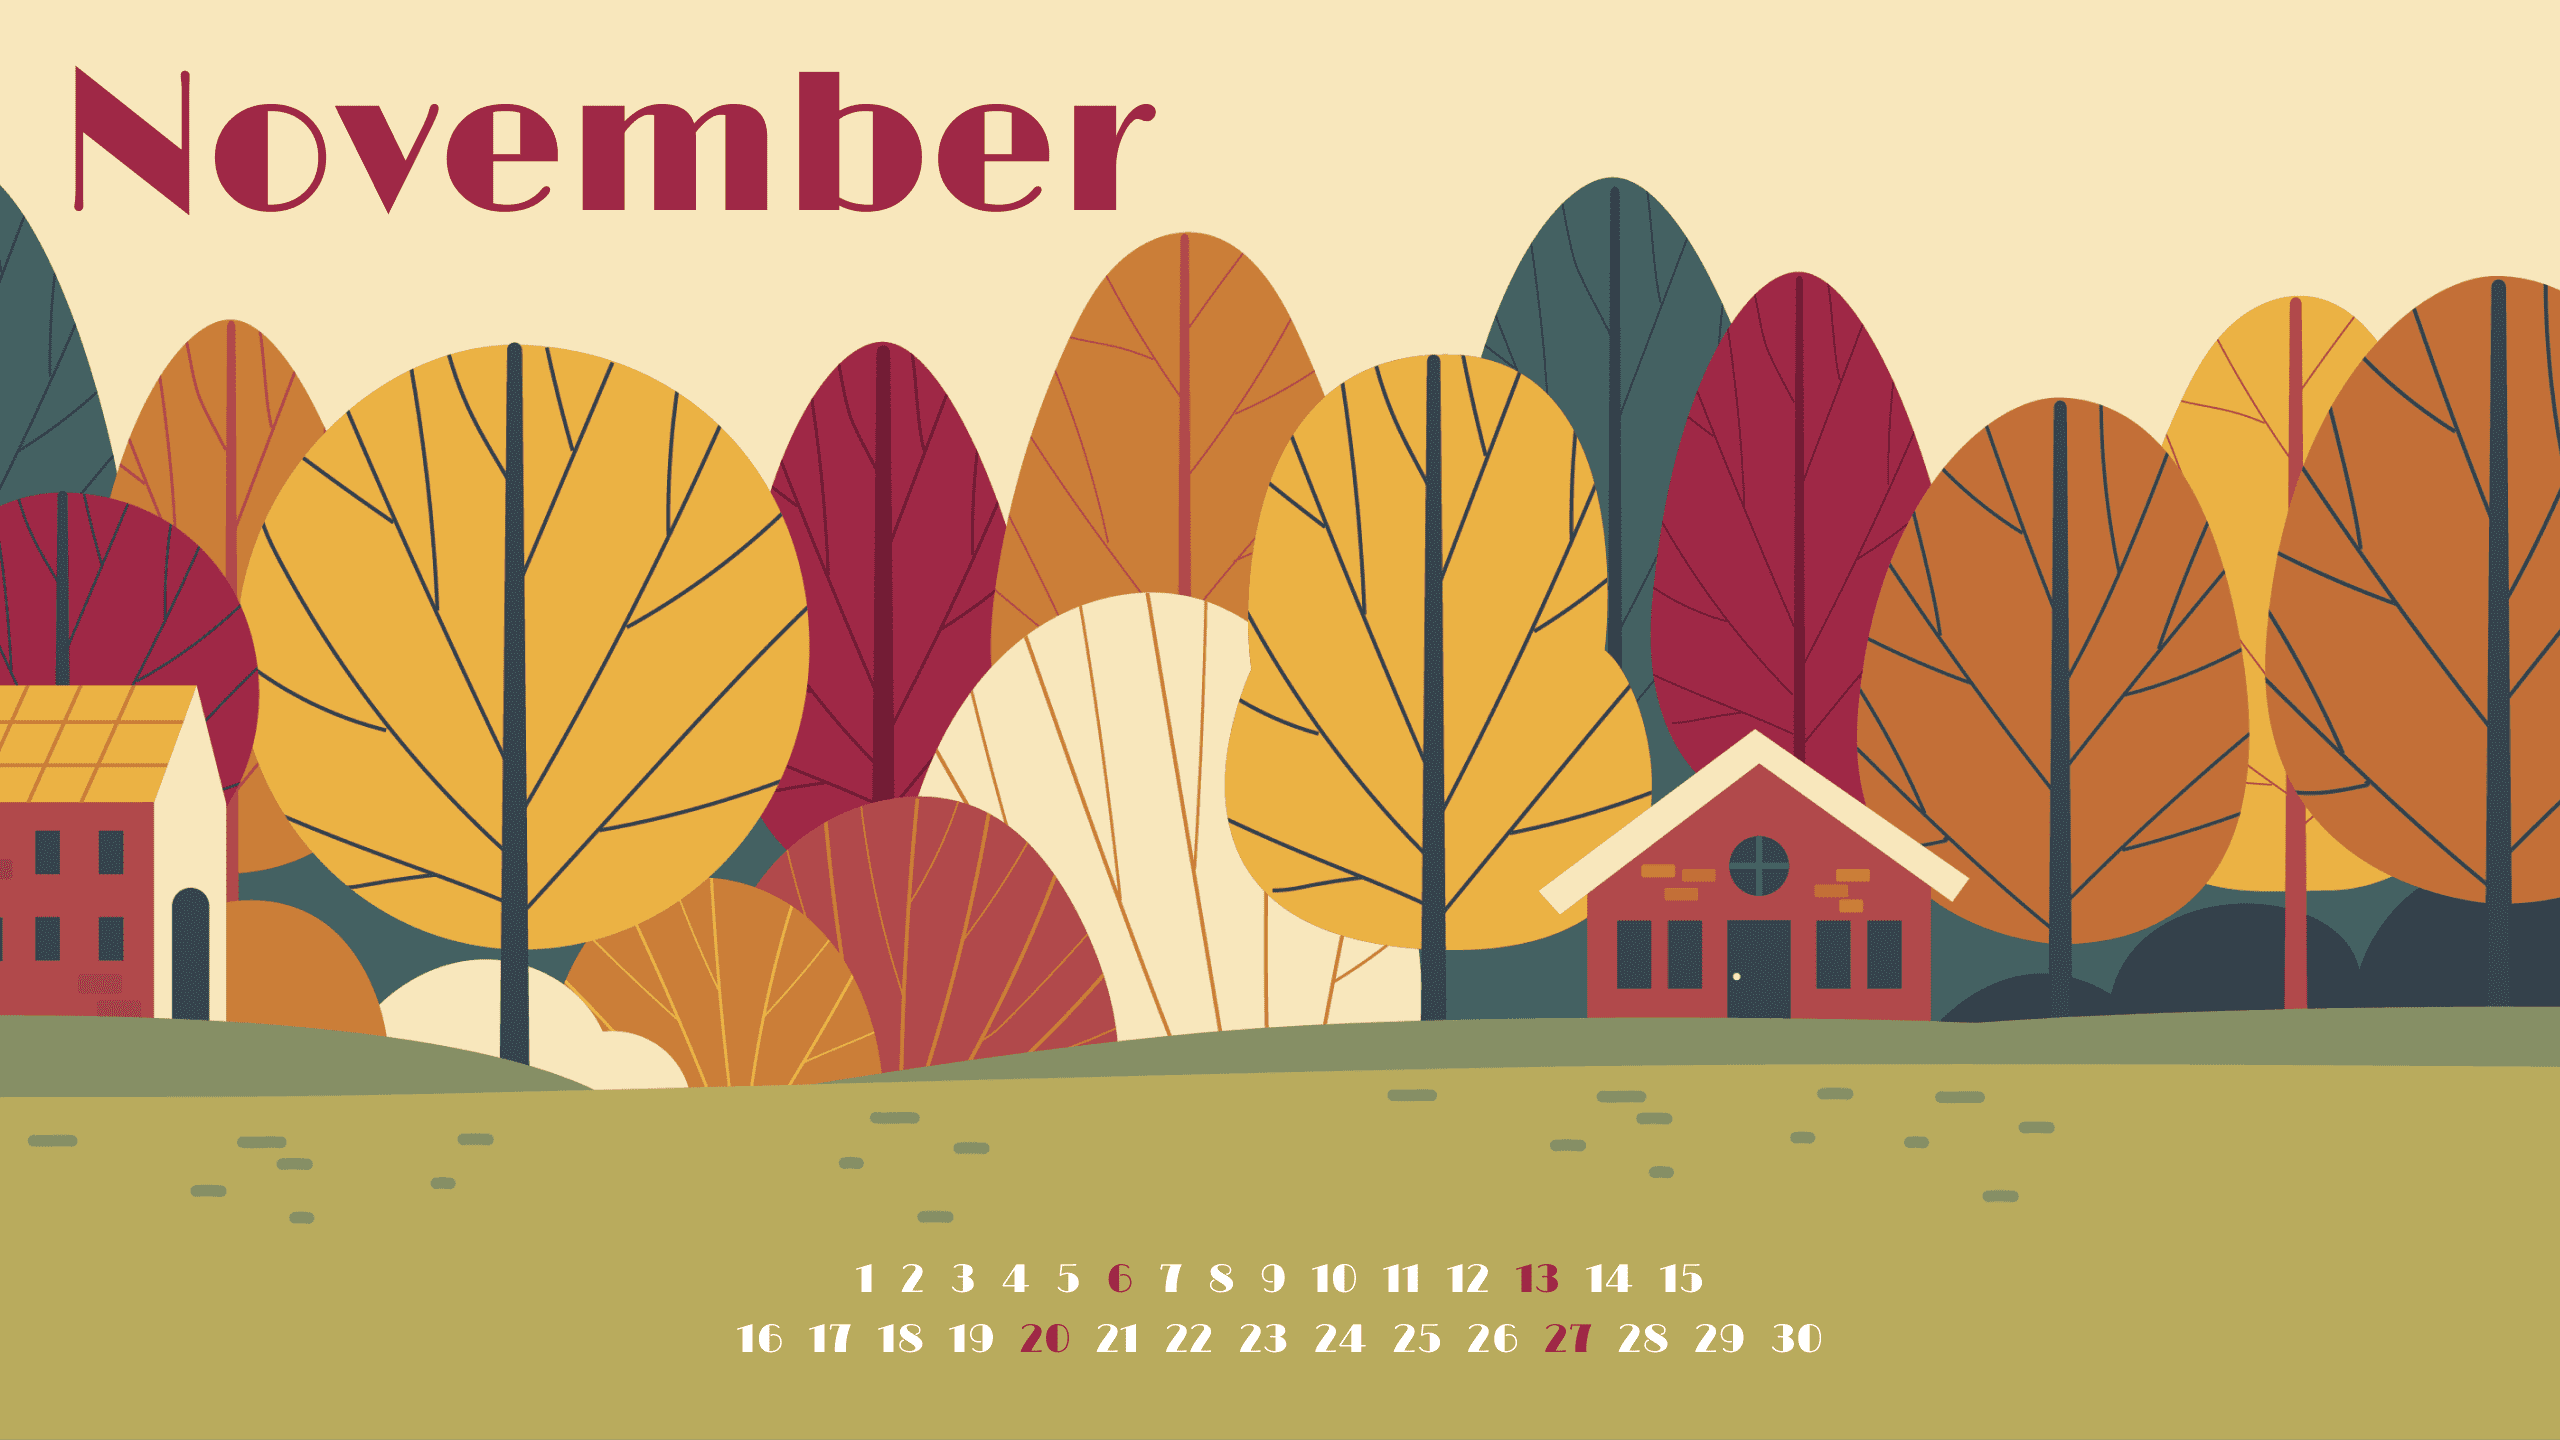 Free calendar for November, picture size 2560x1440.